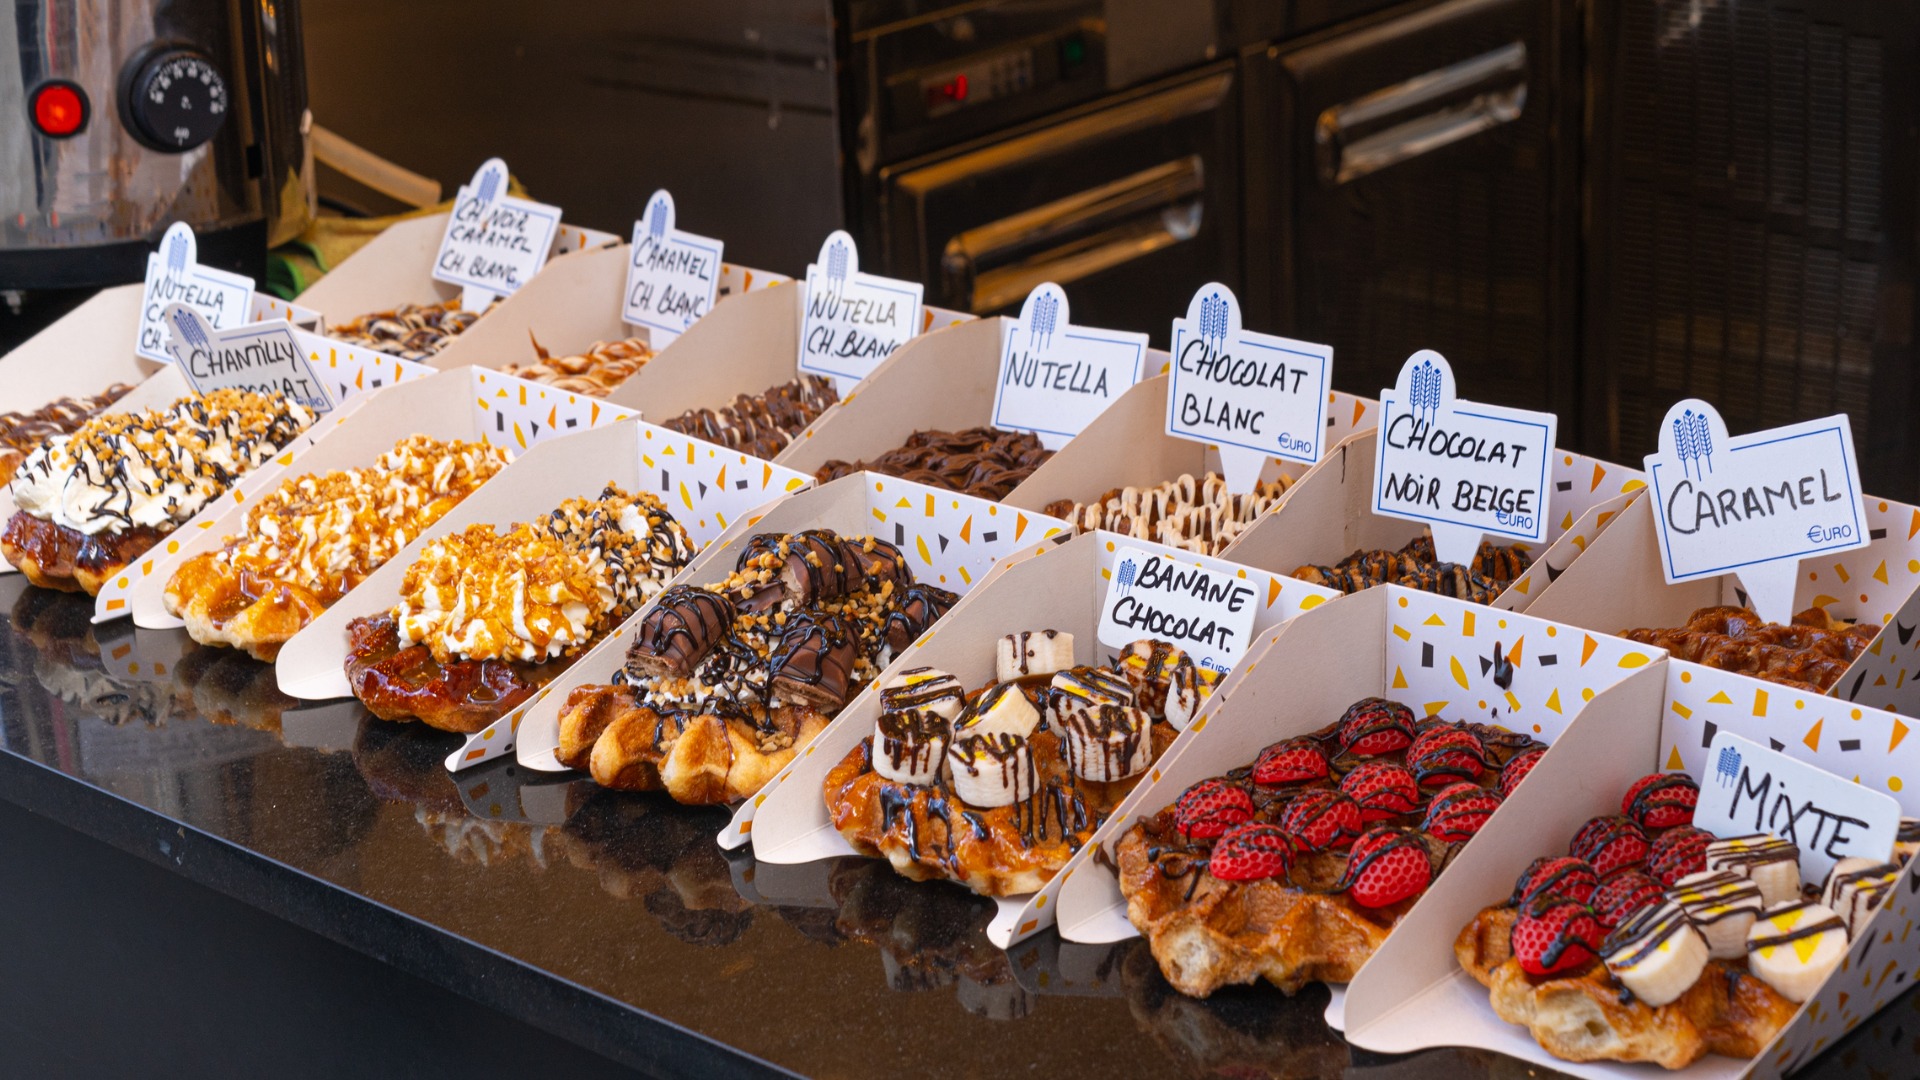 This image shows a display of several Belgian waffles with various colorful toppings. 